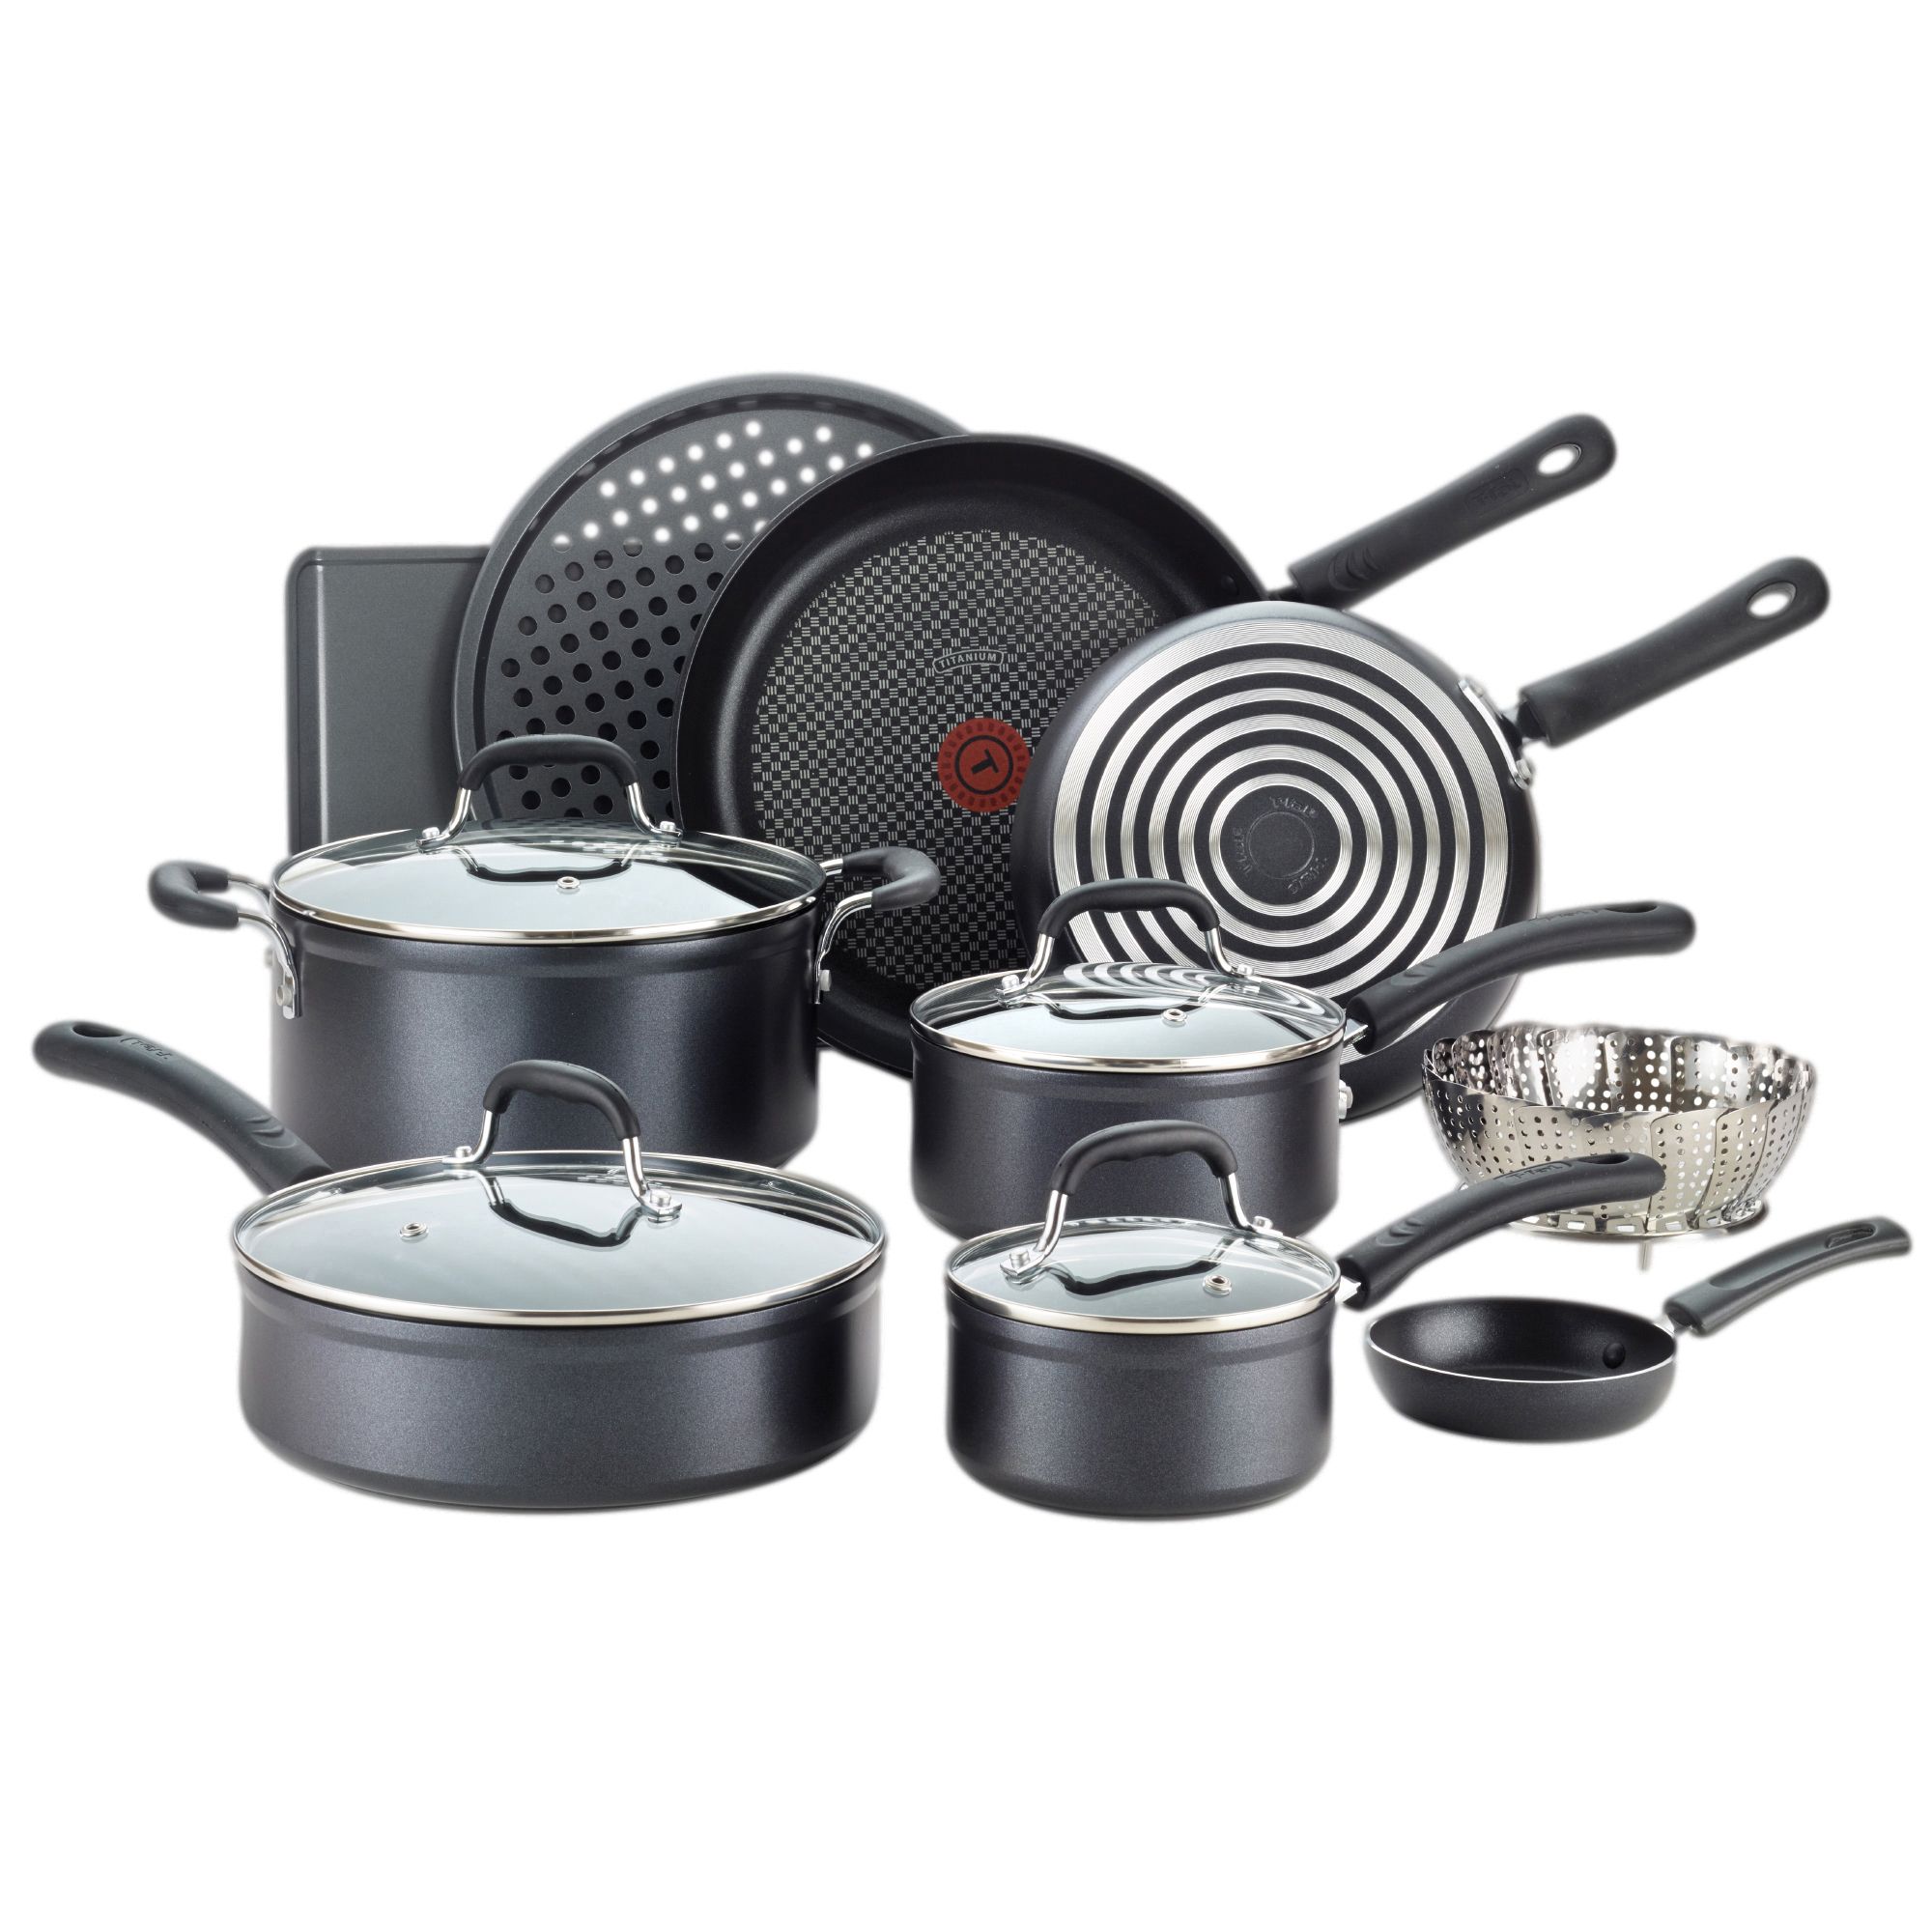 T Fal Pots And Pans Store, 57% OFF | www.ingeniovirtual.com